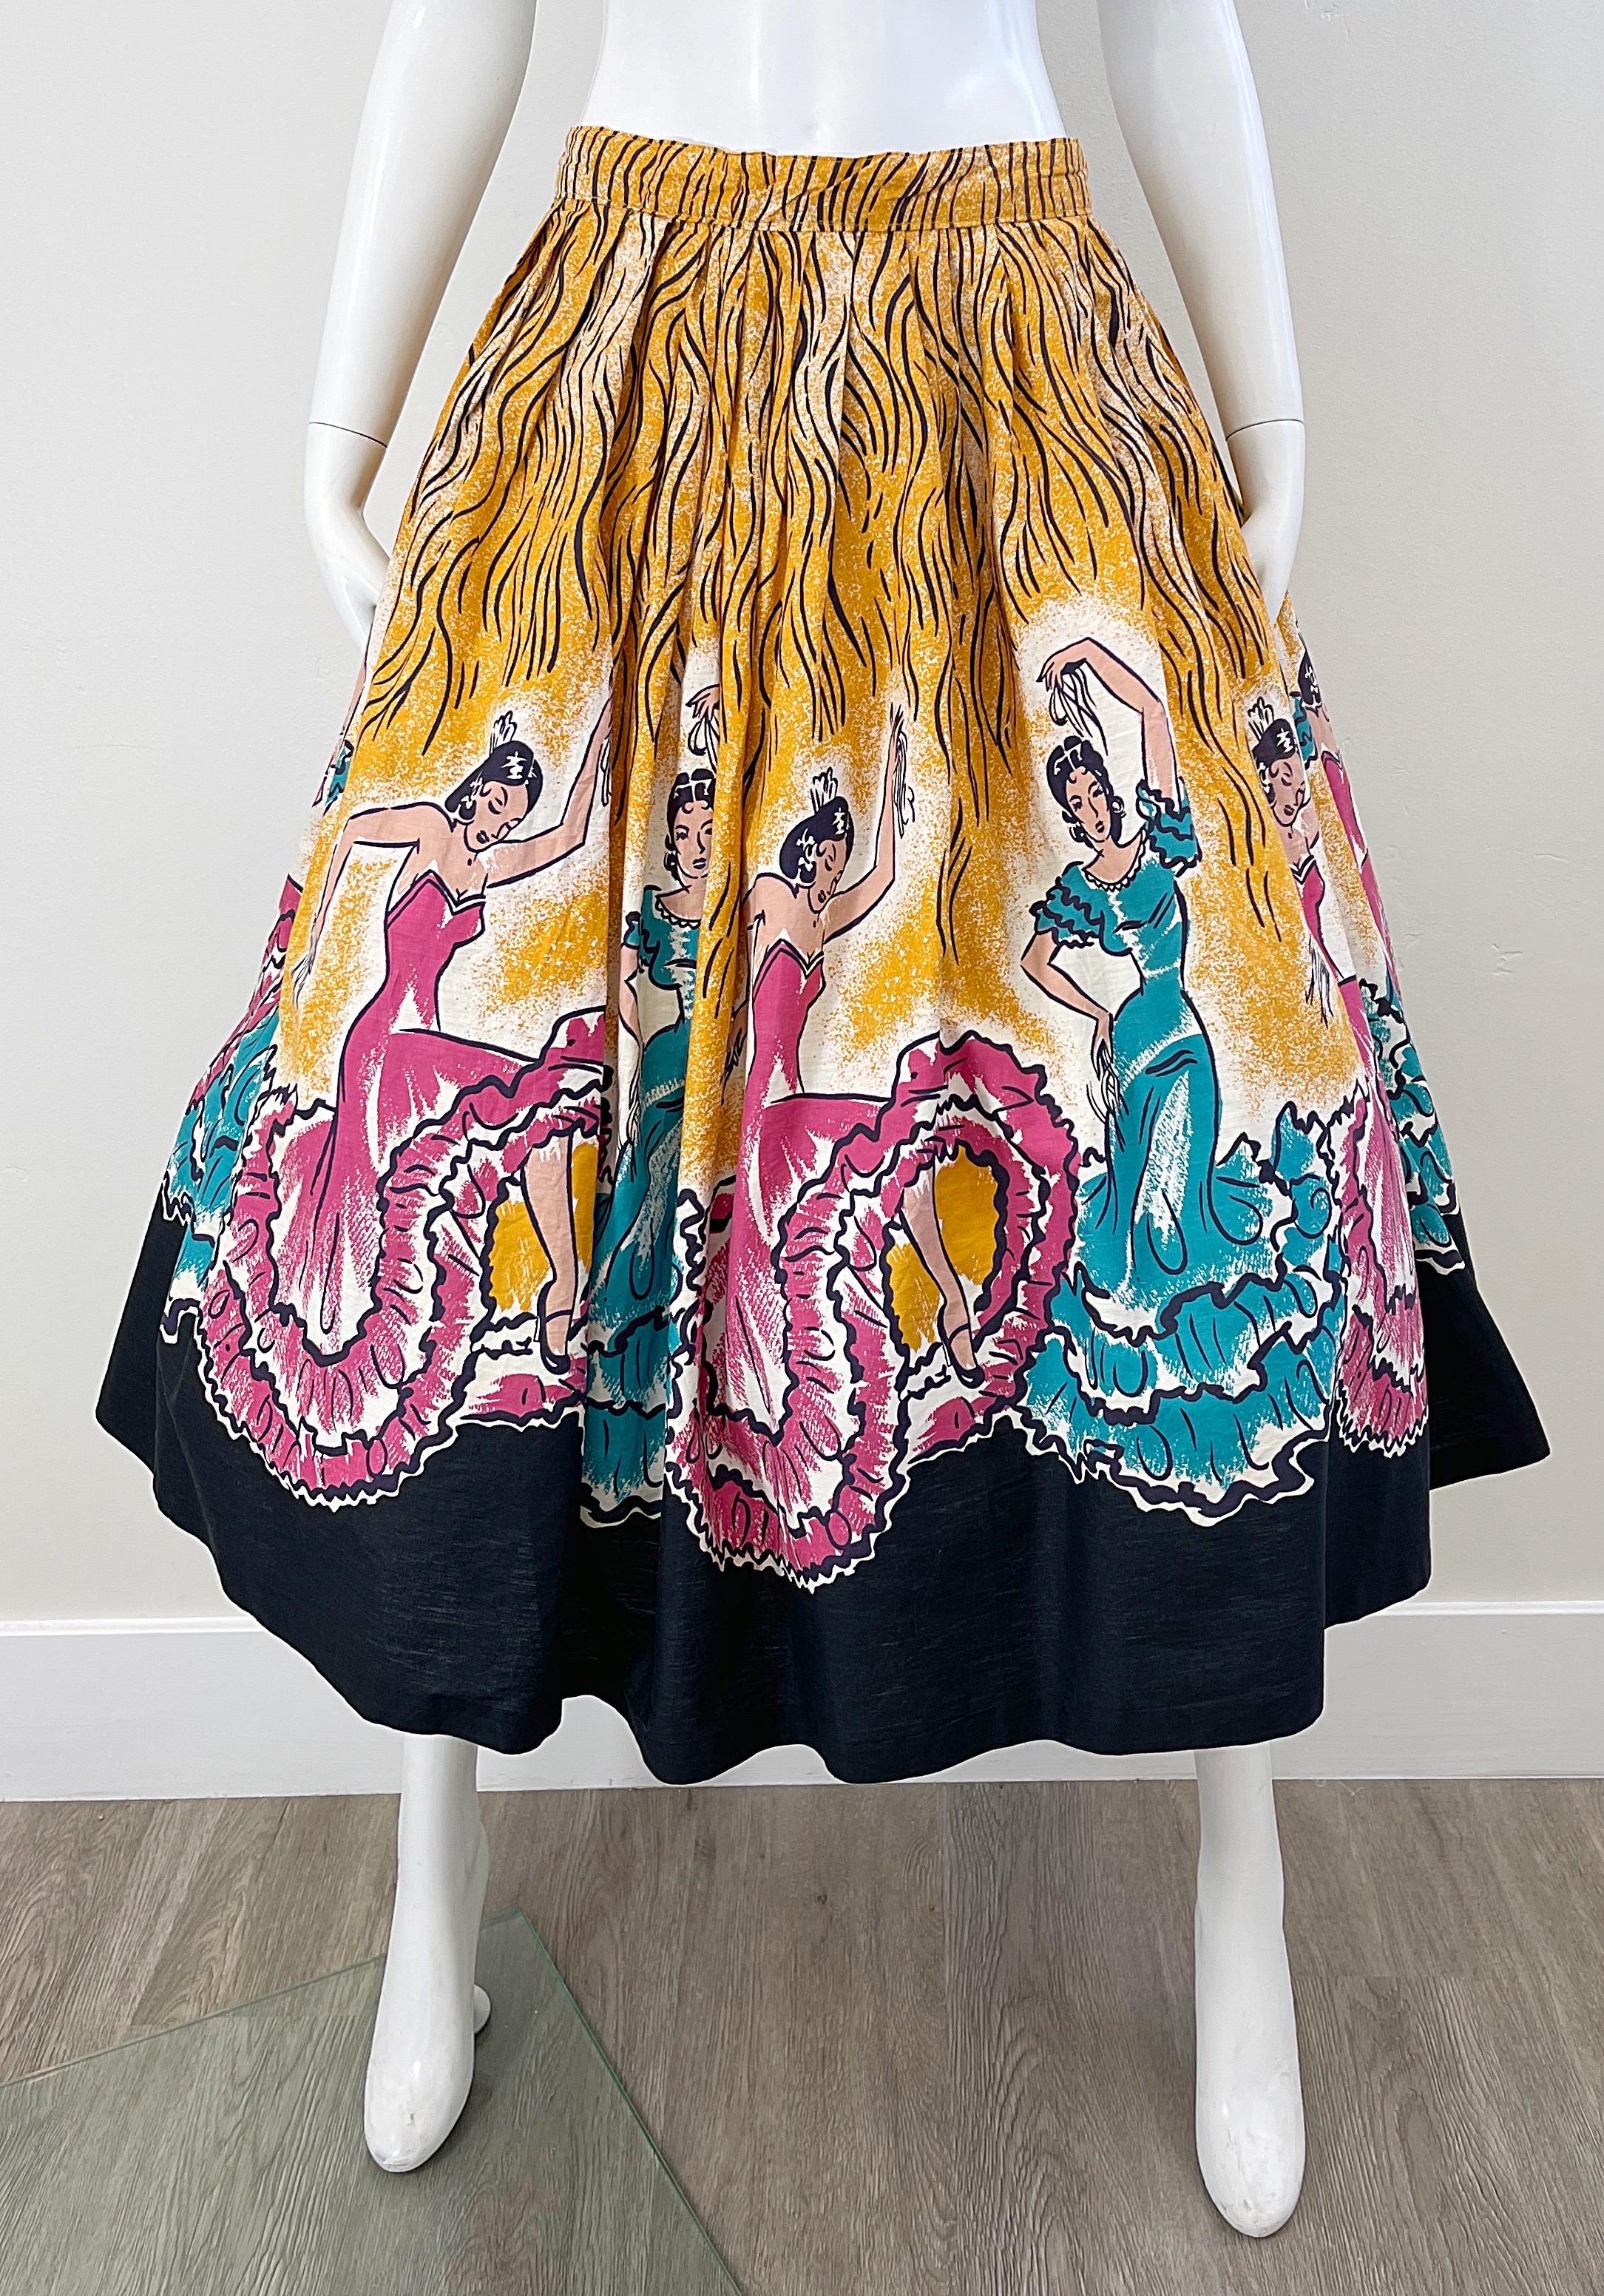 Rare vintage 50s hand painted novelty flamenco dancer print cotton circle skirt ! Features flamenco dancers in pink and turquoise blue dance dresses. Vibrant marigold yellow background with black abstract lines. Hidden metal zipper up the side with